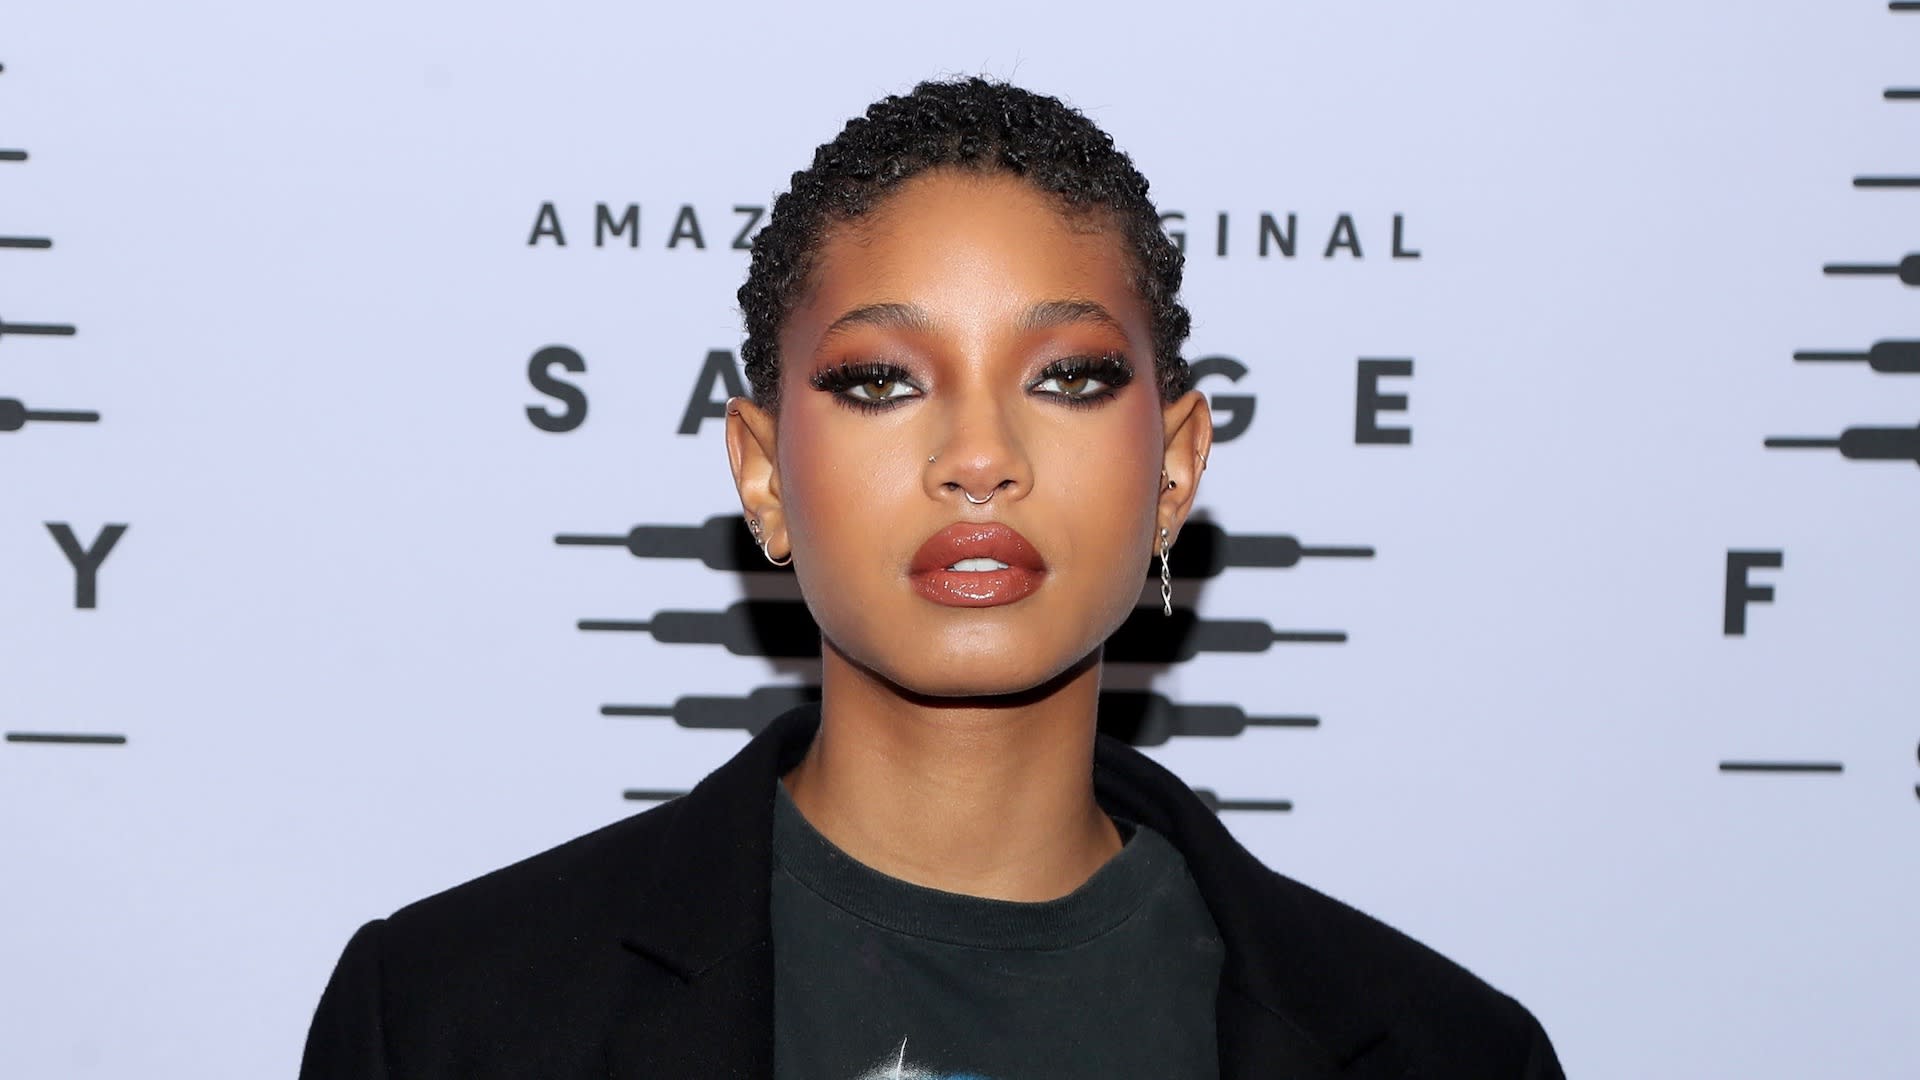 Willow Smith receives protection order from convicted sex offender